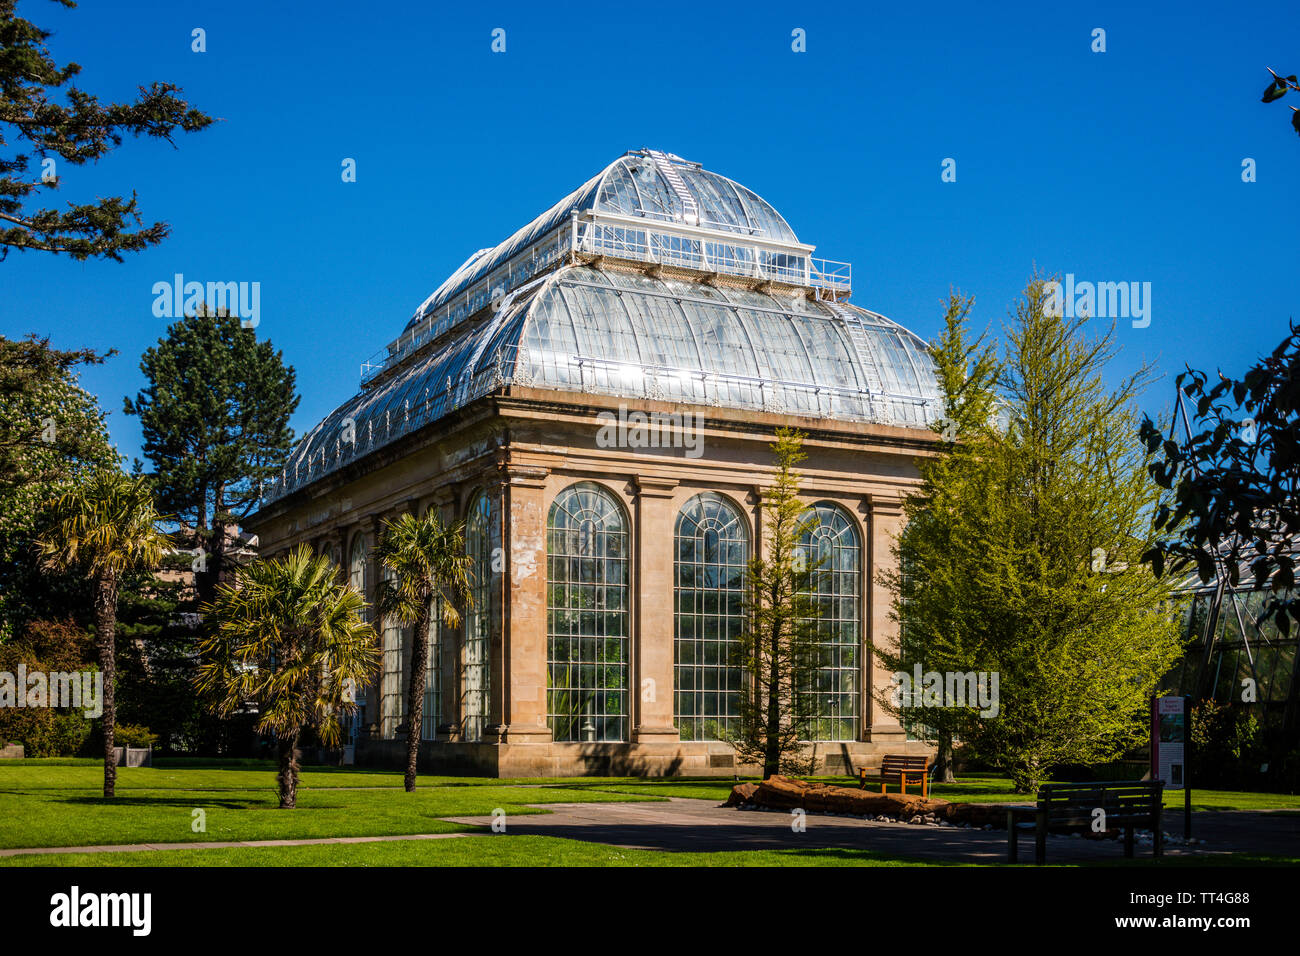 Fossil Courtyard and the Temperate Palm House at the Royal Botanic Garden, Edinburgh, Scotland. Stock Photo